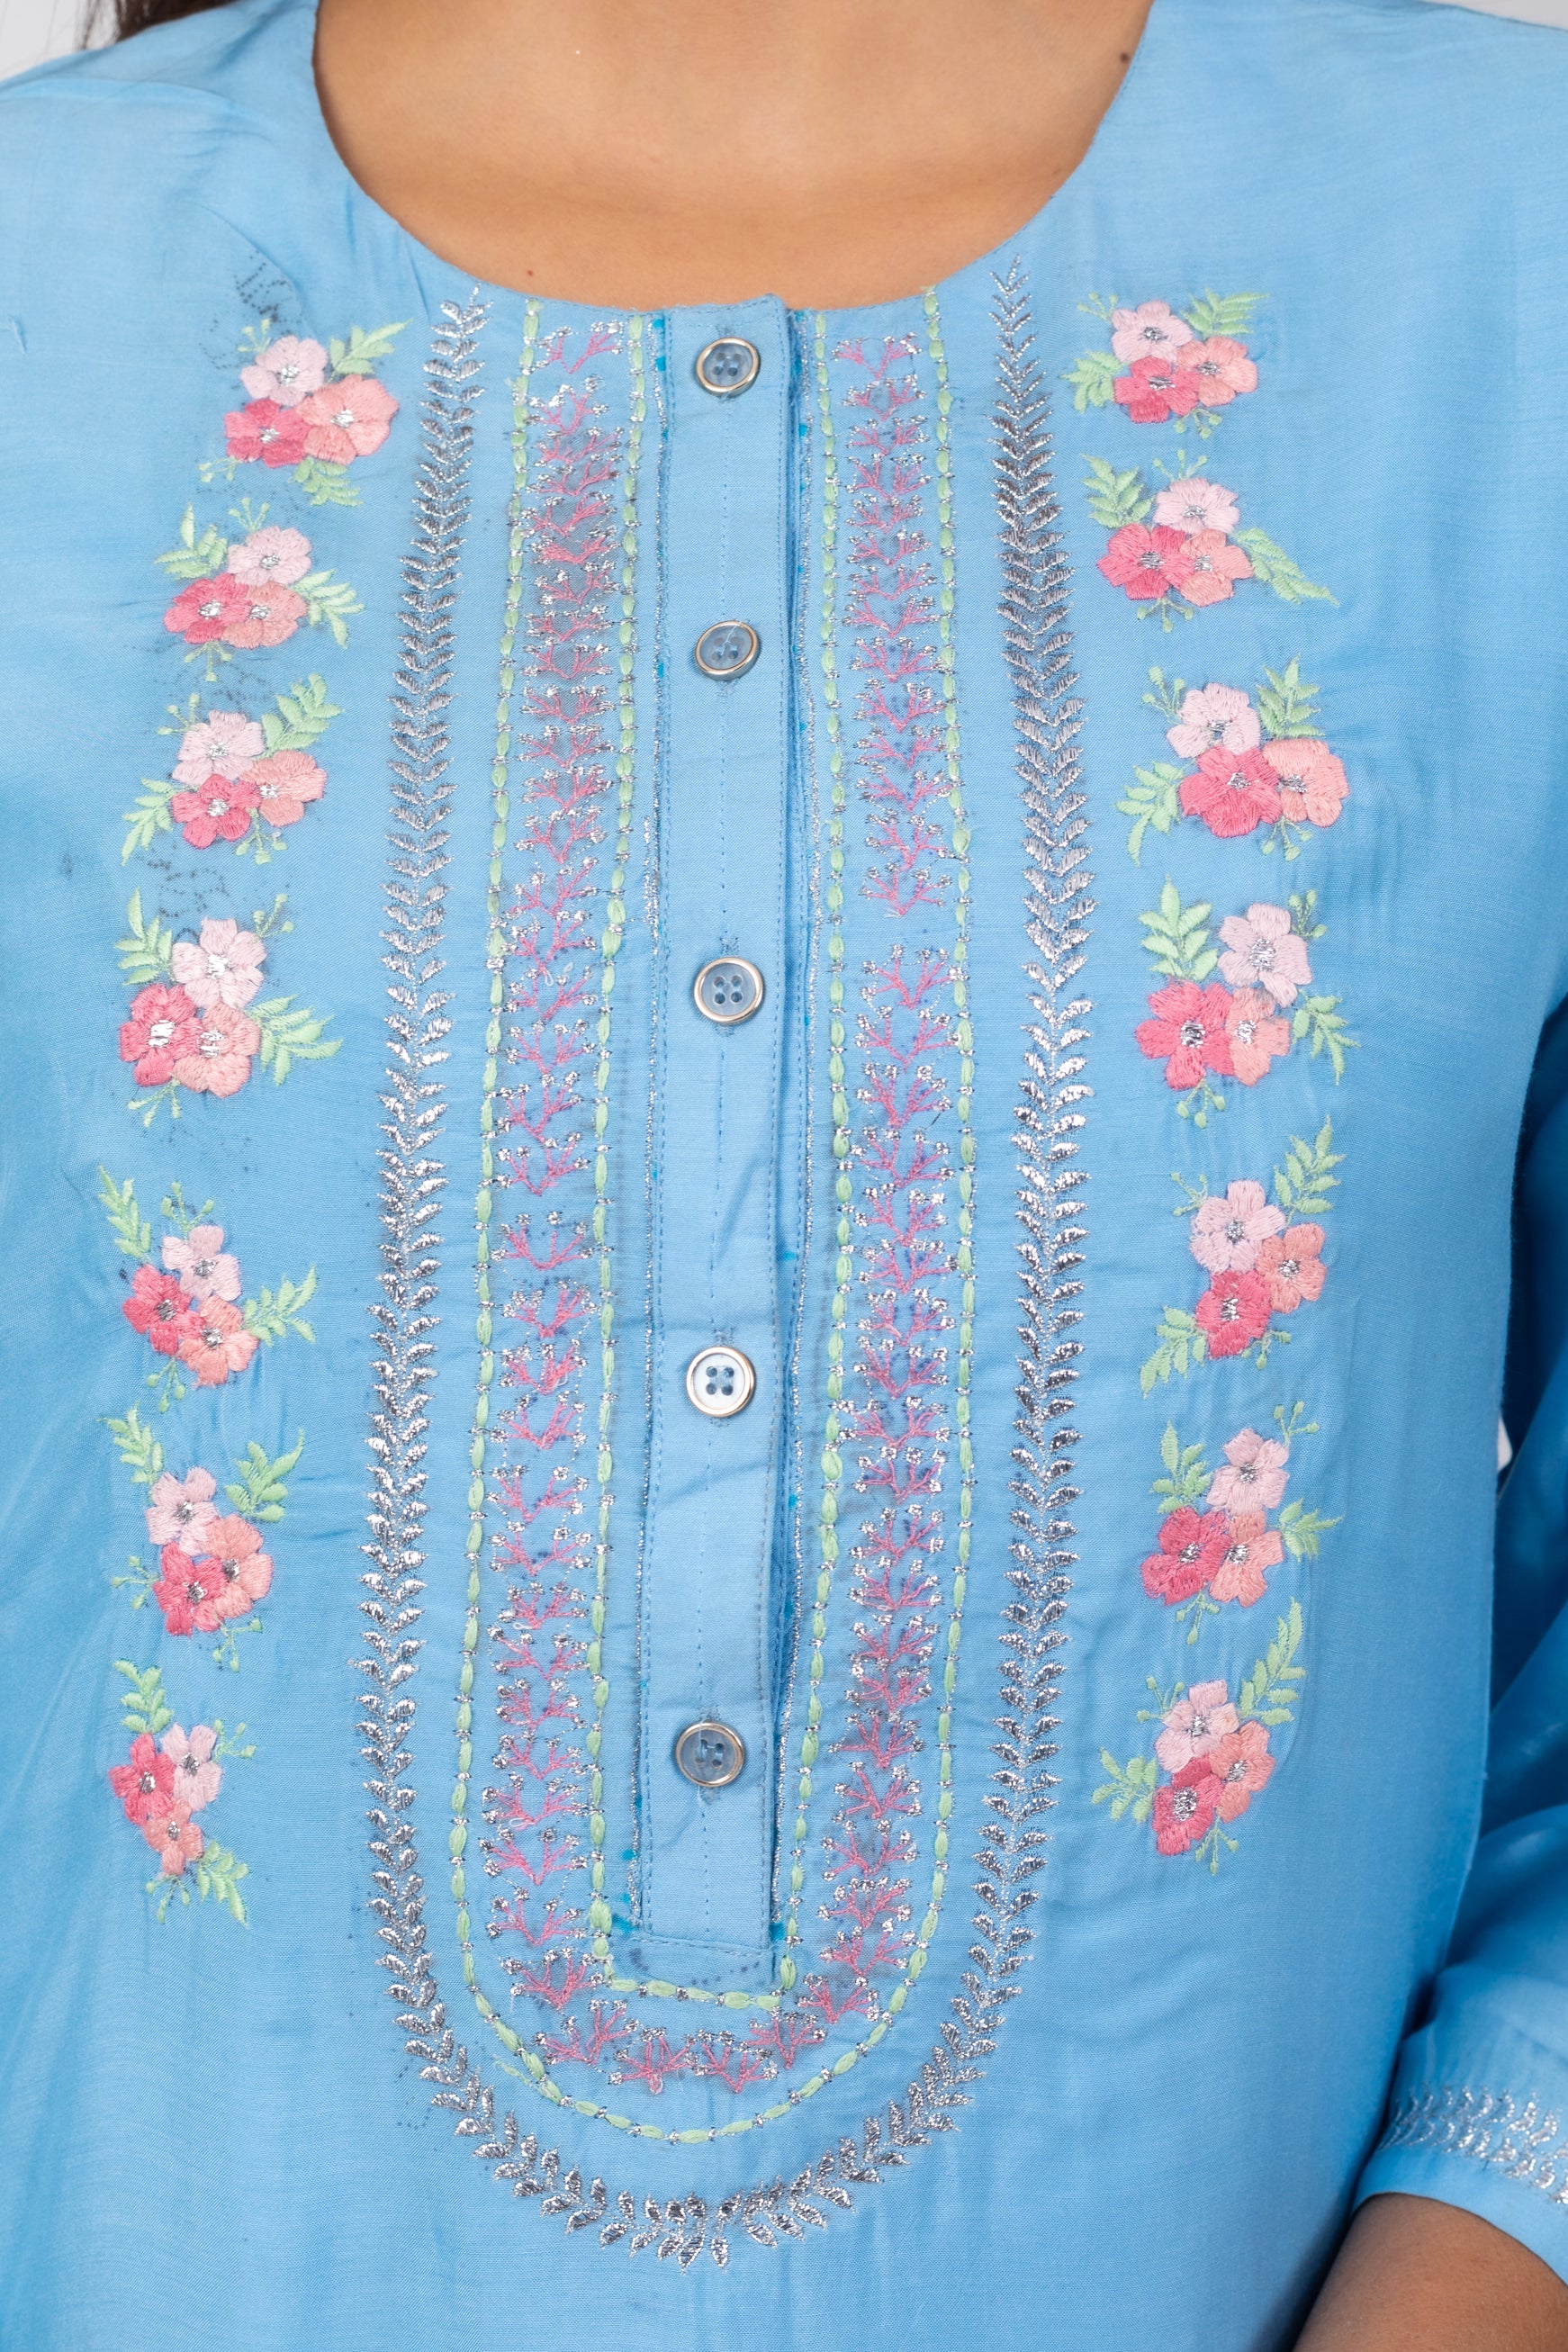 blue-embroidered-straight-kurta-with-embroidered-yoke